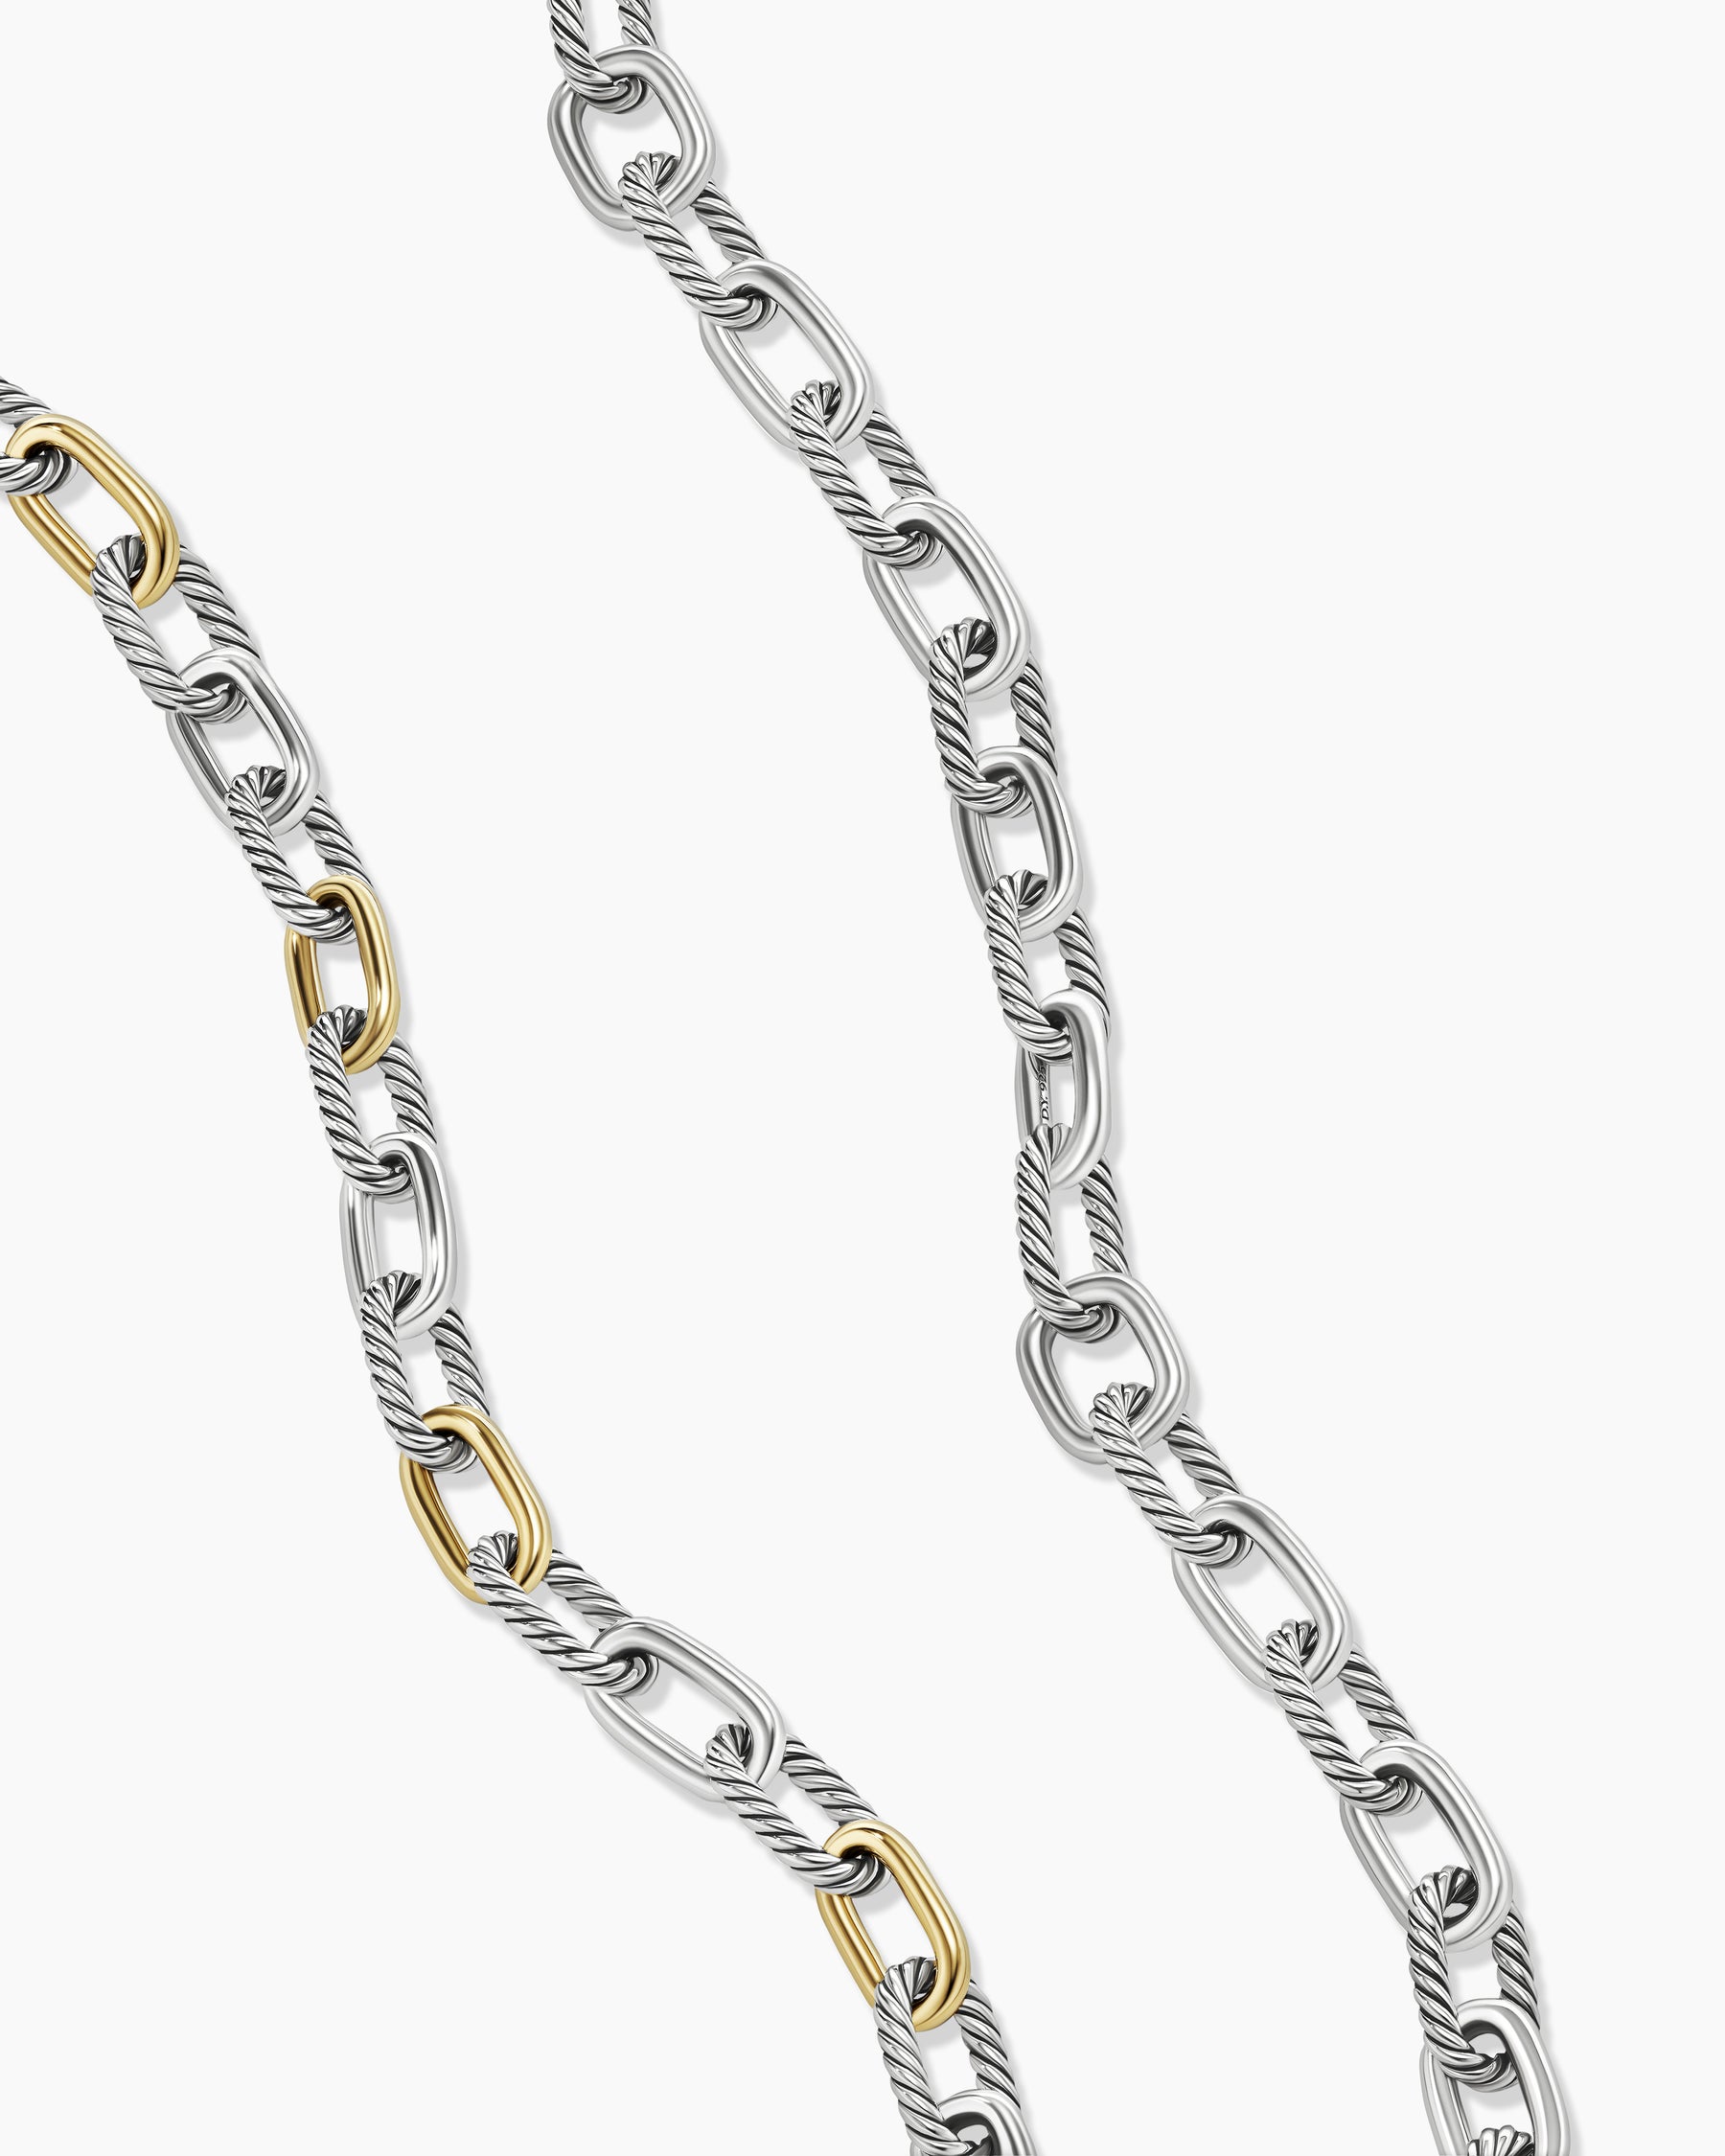 Sterling Silver And 18K Yellow Gold 'David Yurman' Rope Necklace, 17 I –  Ferro Jewelers